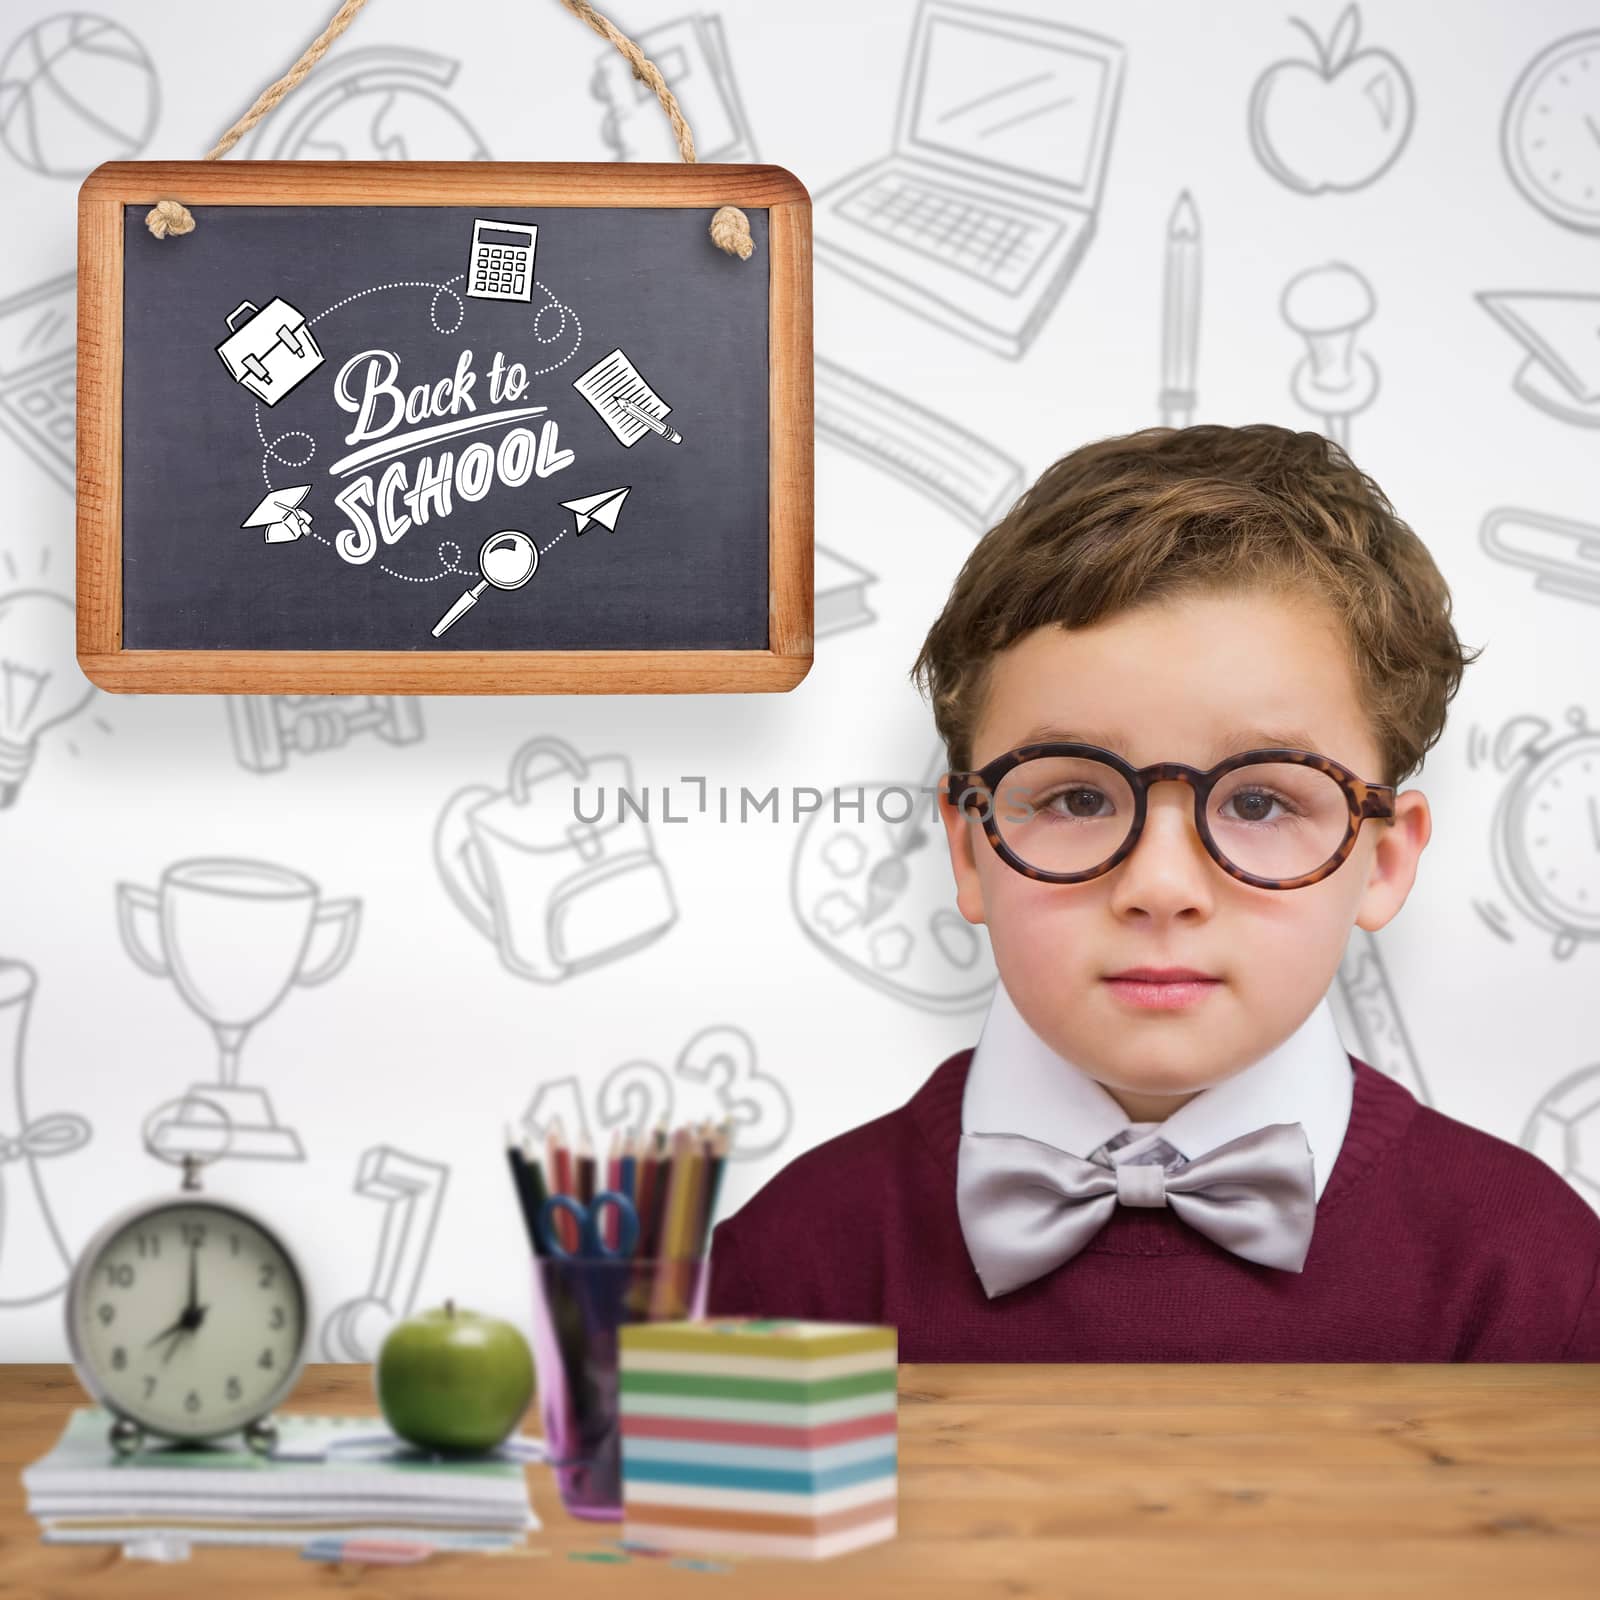 Cute schoolboy wearing reading glasses against bleached wooden planks background